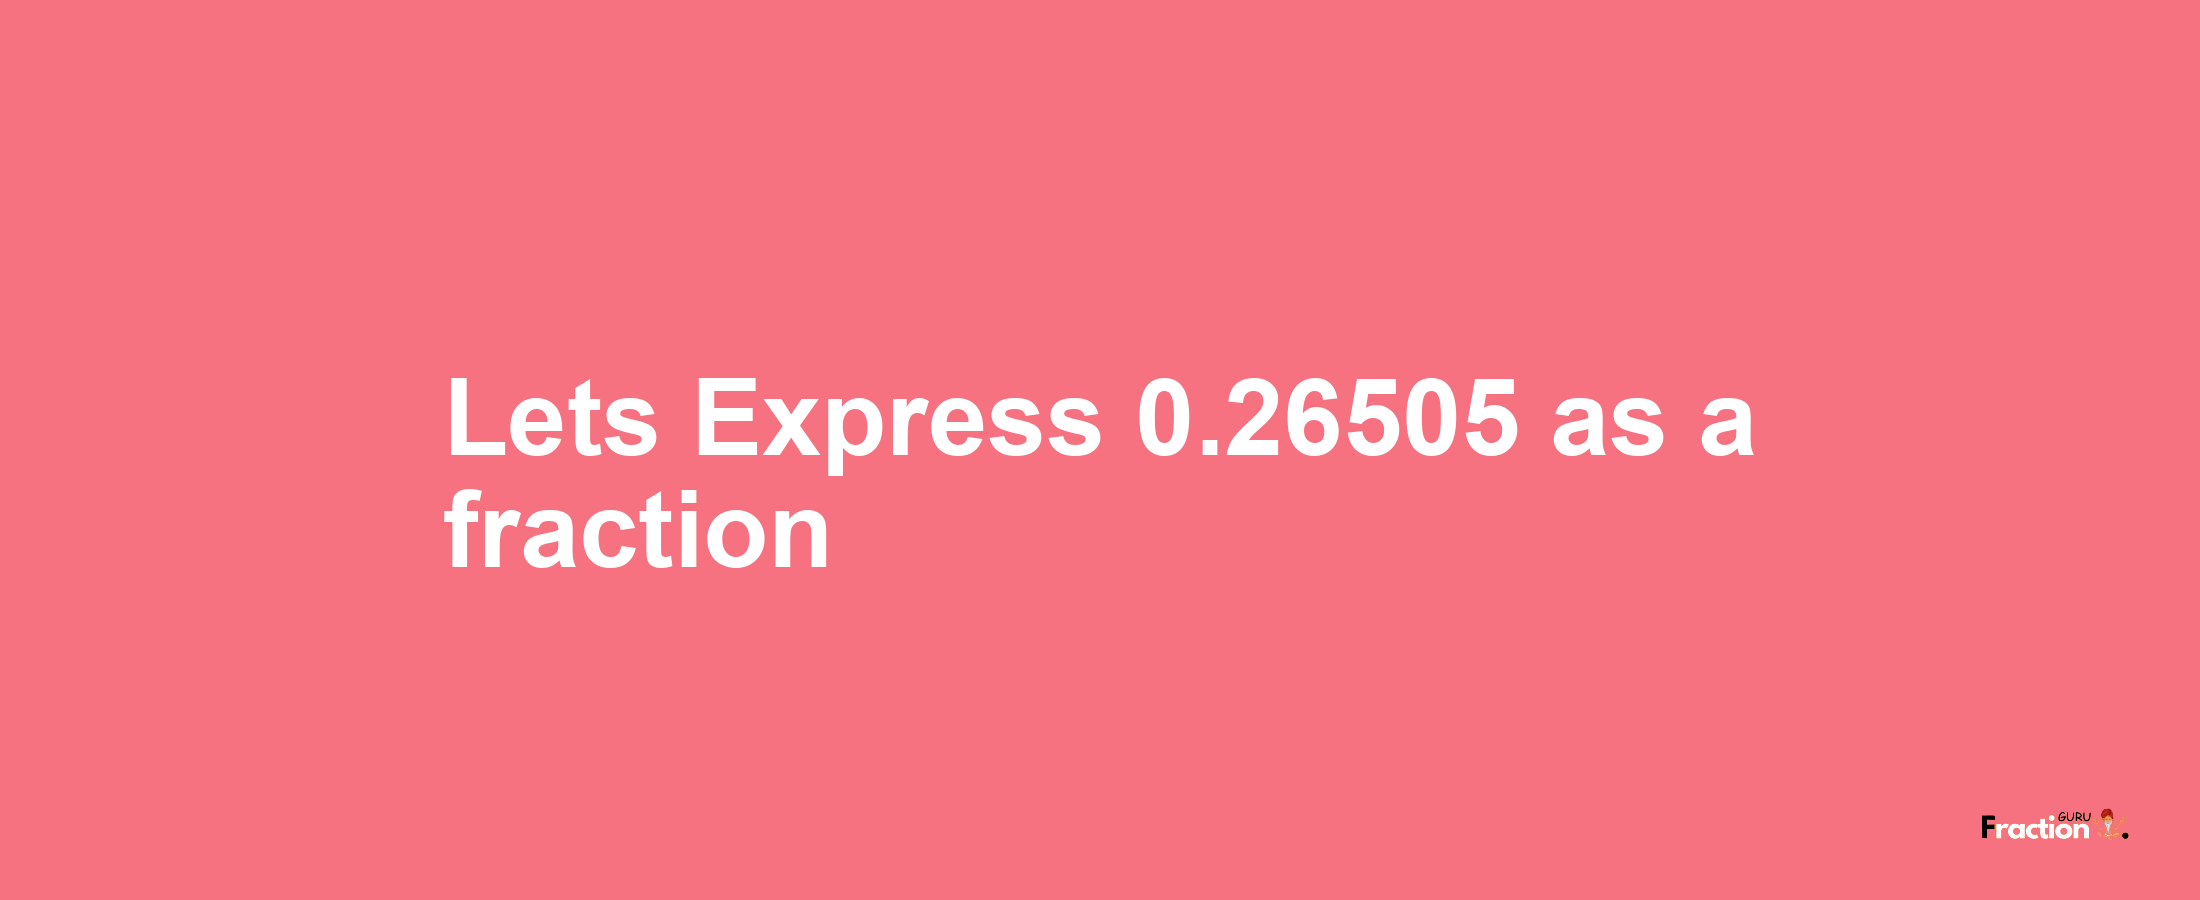 Lets Express 0.26505 as afraction